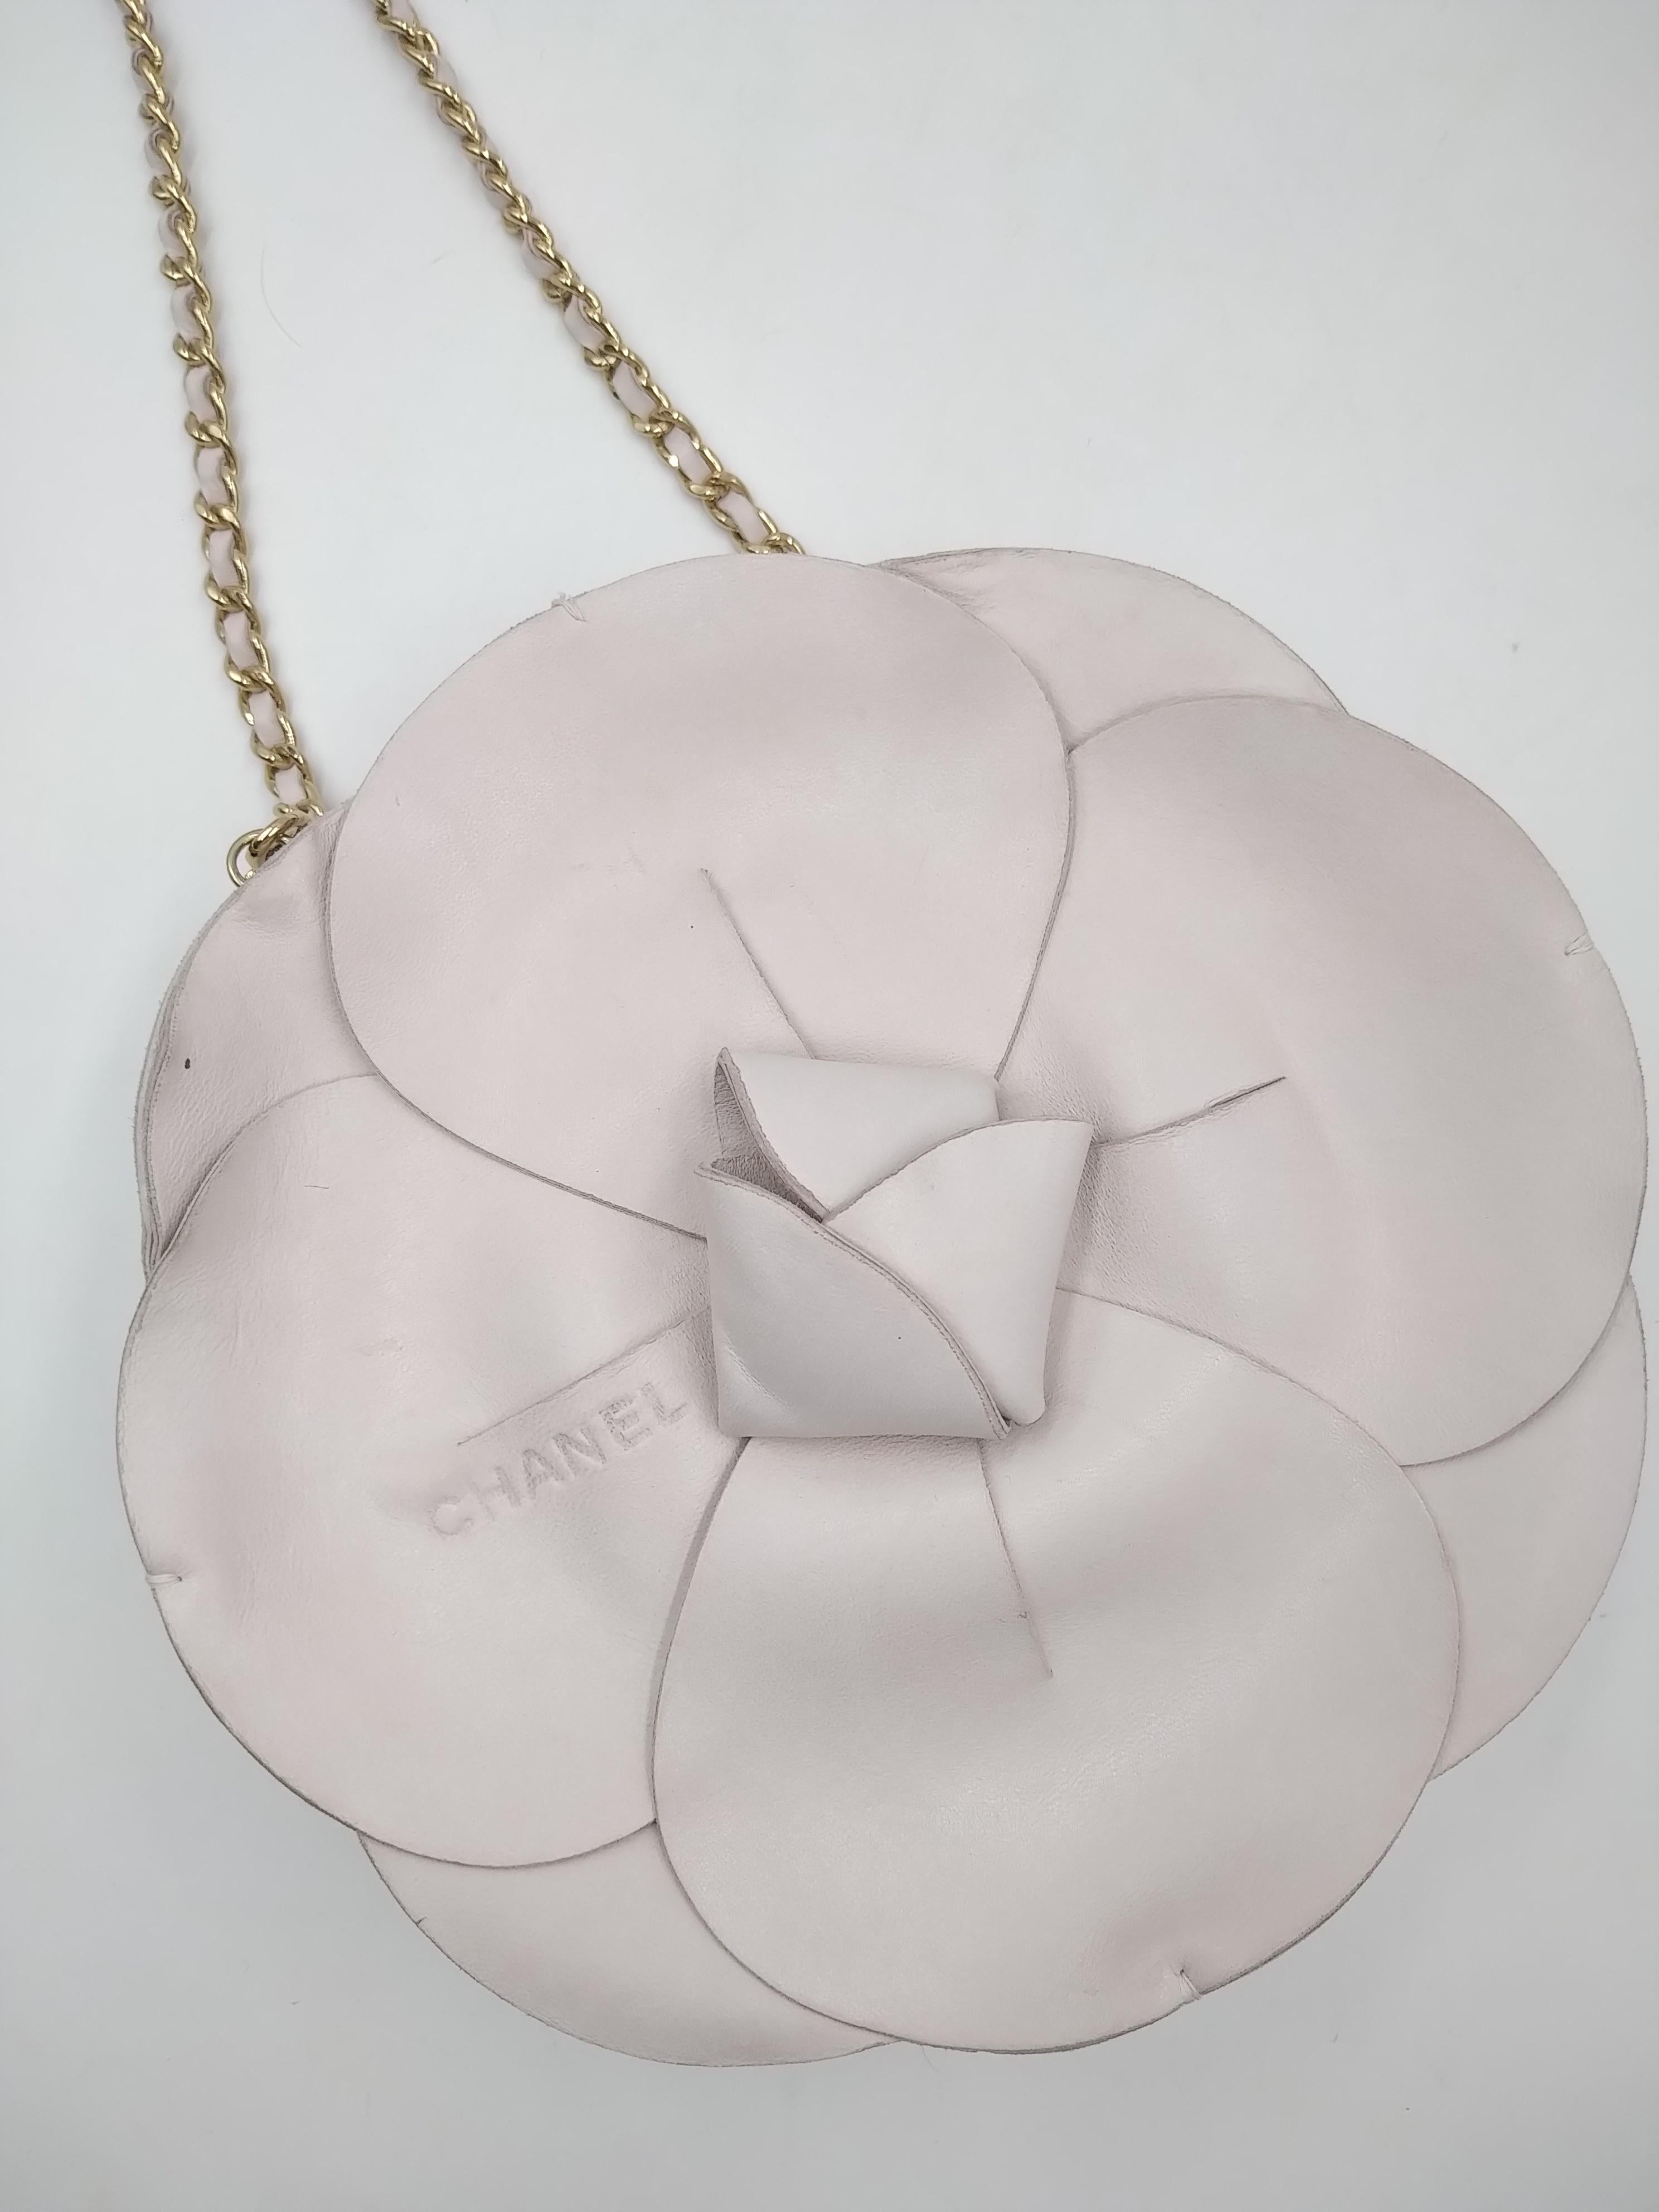 Chanel Light Pink Leather Camellia Flower Bag 2002/2003
- 100% authentic Chanel
- leather in light pink for the petals, satin in light pink on the outside back
- opening with magnetic snap button
- leather in light pink inside
- can be worn with or